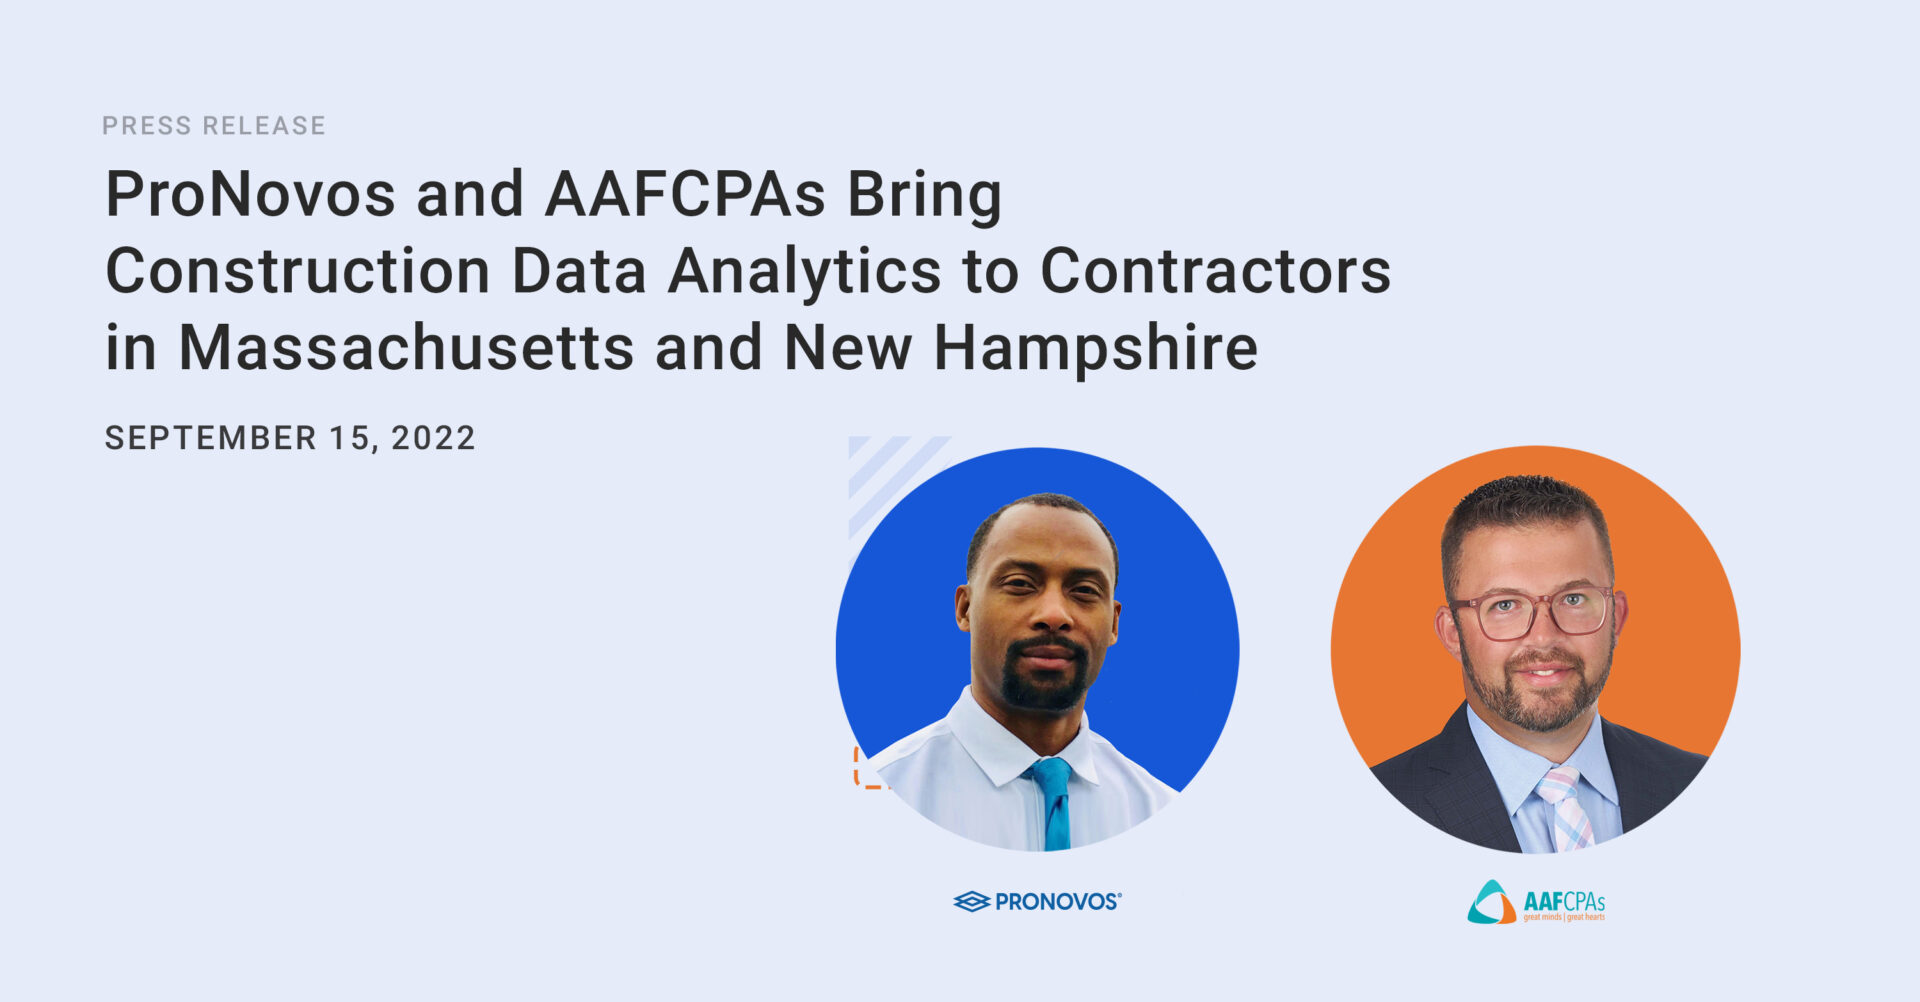 ProNovos and AAFCPAs Bring Construction Data Analytics to Contractors in Massachusetts and New Hampshire